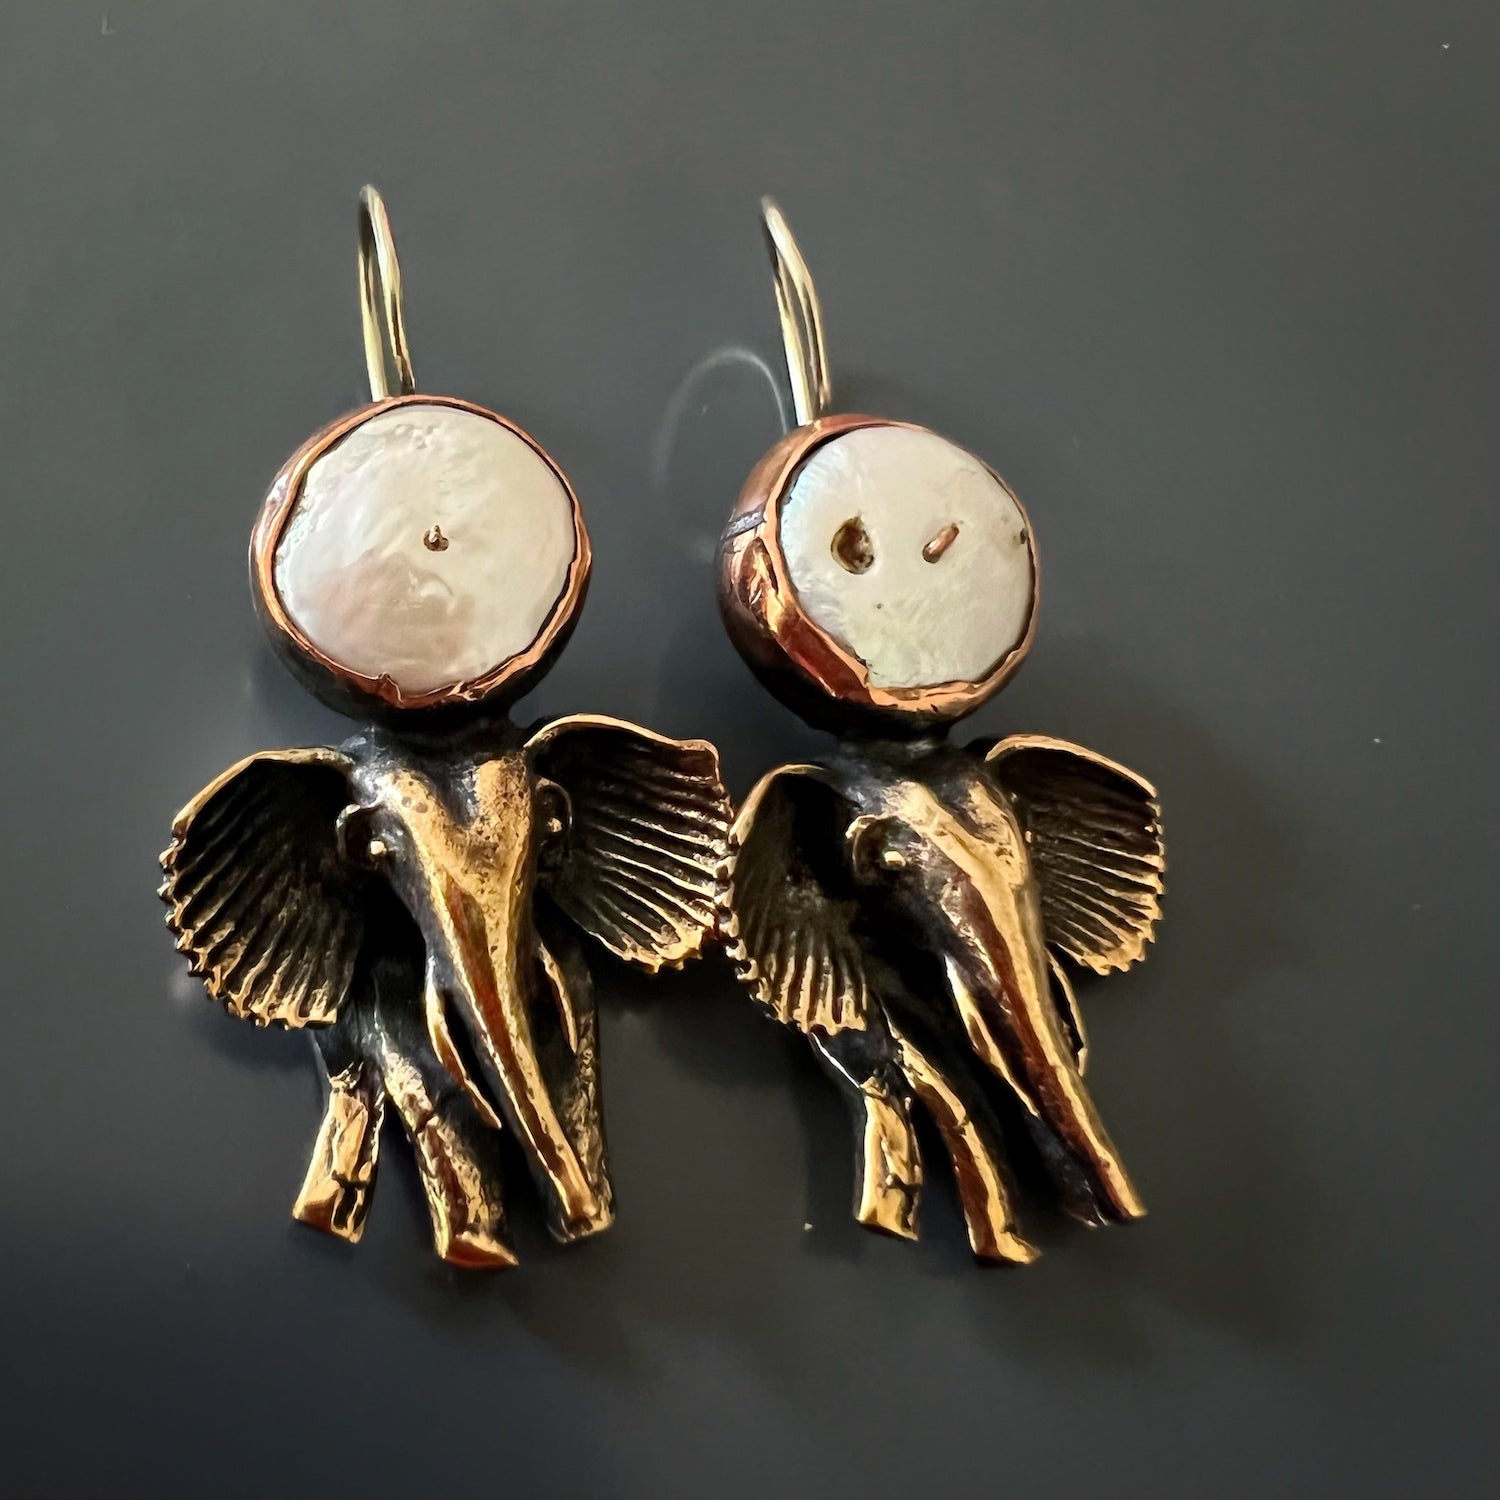 Top-down view of the Handmade Unique Spirit Elephant Earrings, displaying the whimsical and sophisticated elephant design with its intricate details and the beautiful pearl gemstone embellishment.